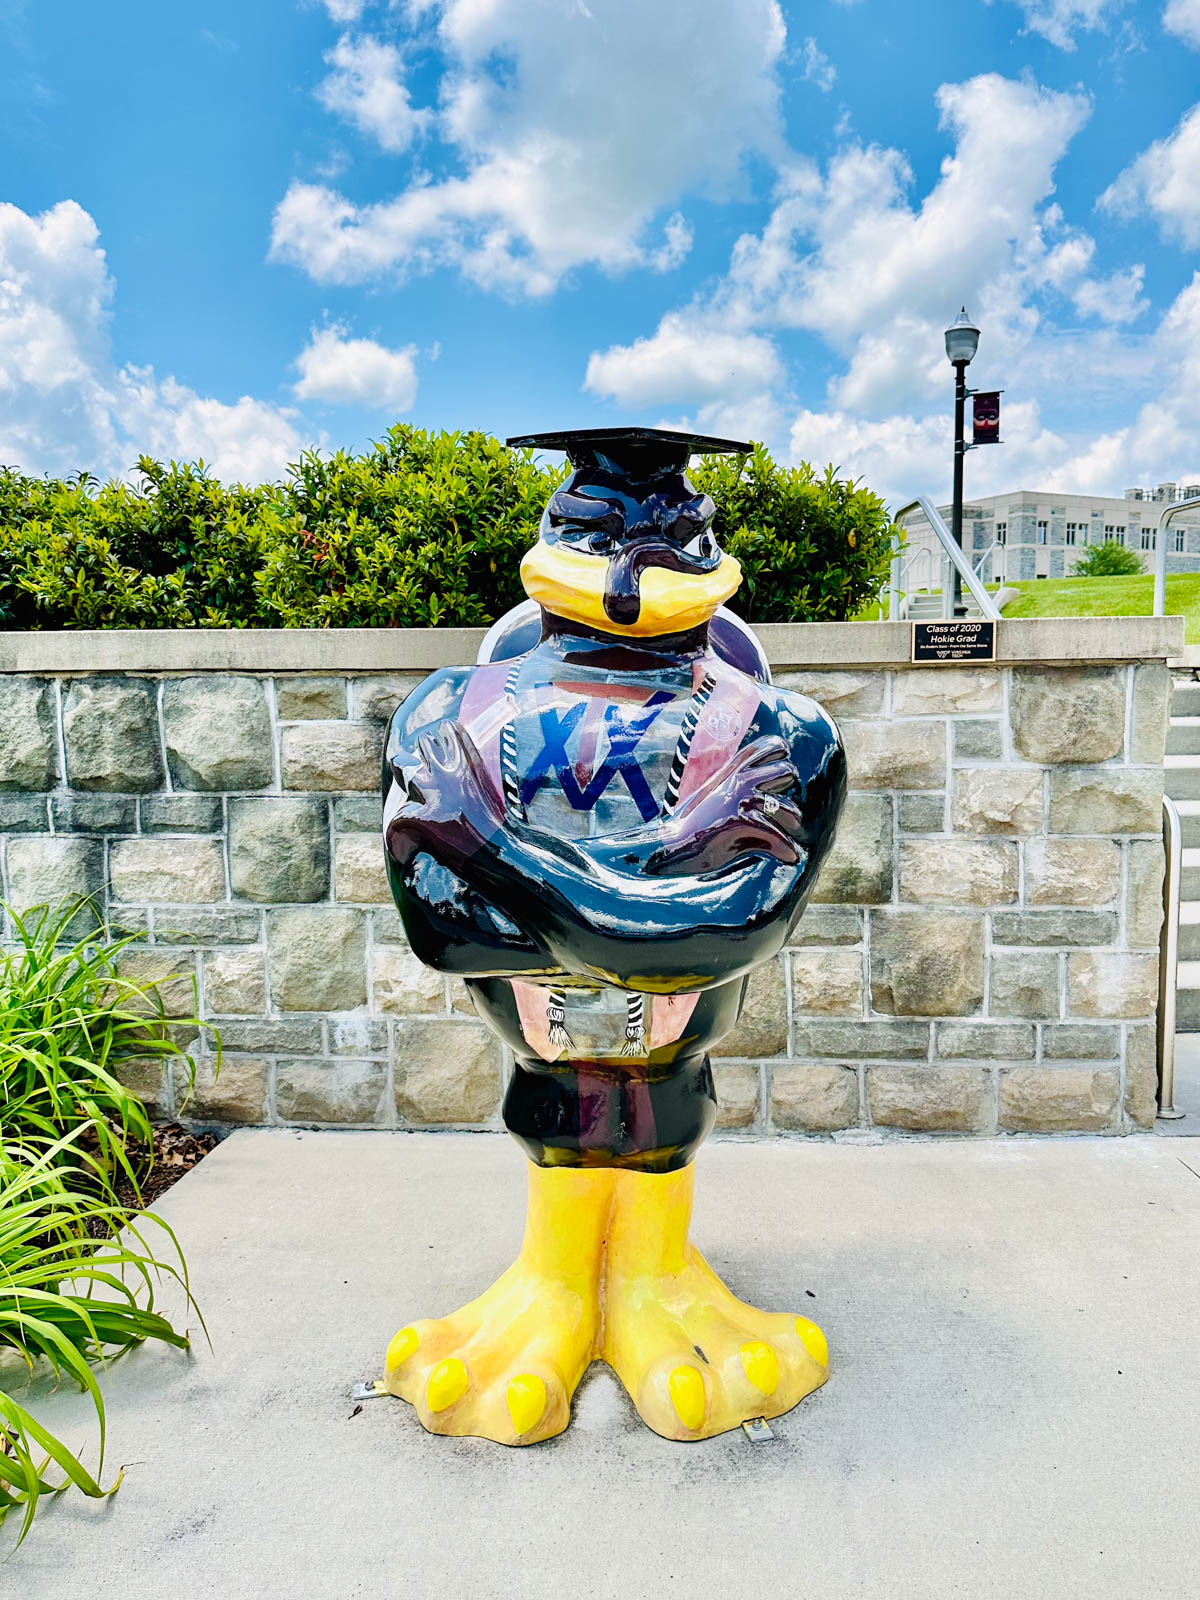 A statue of the VT Hokie bird outside the visitor center on campus.